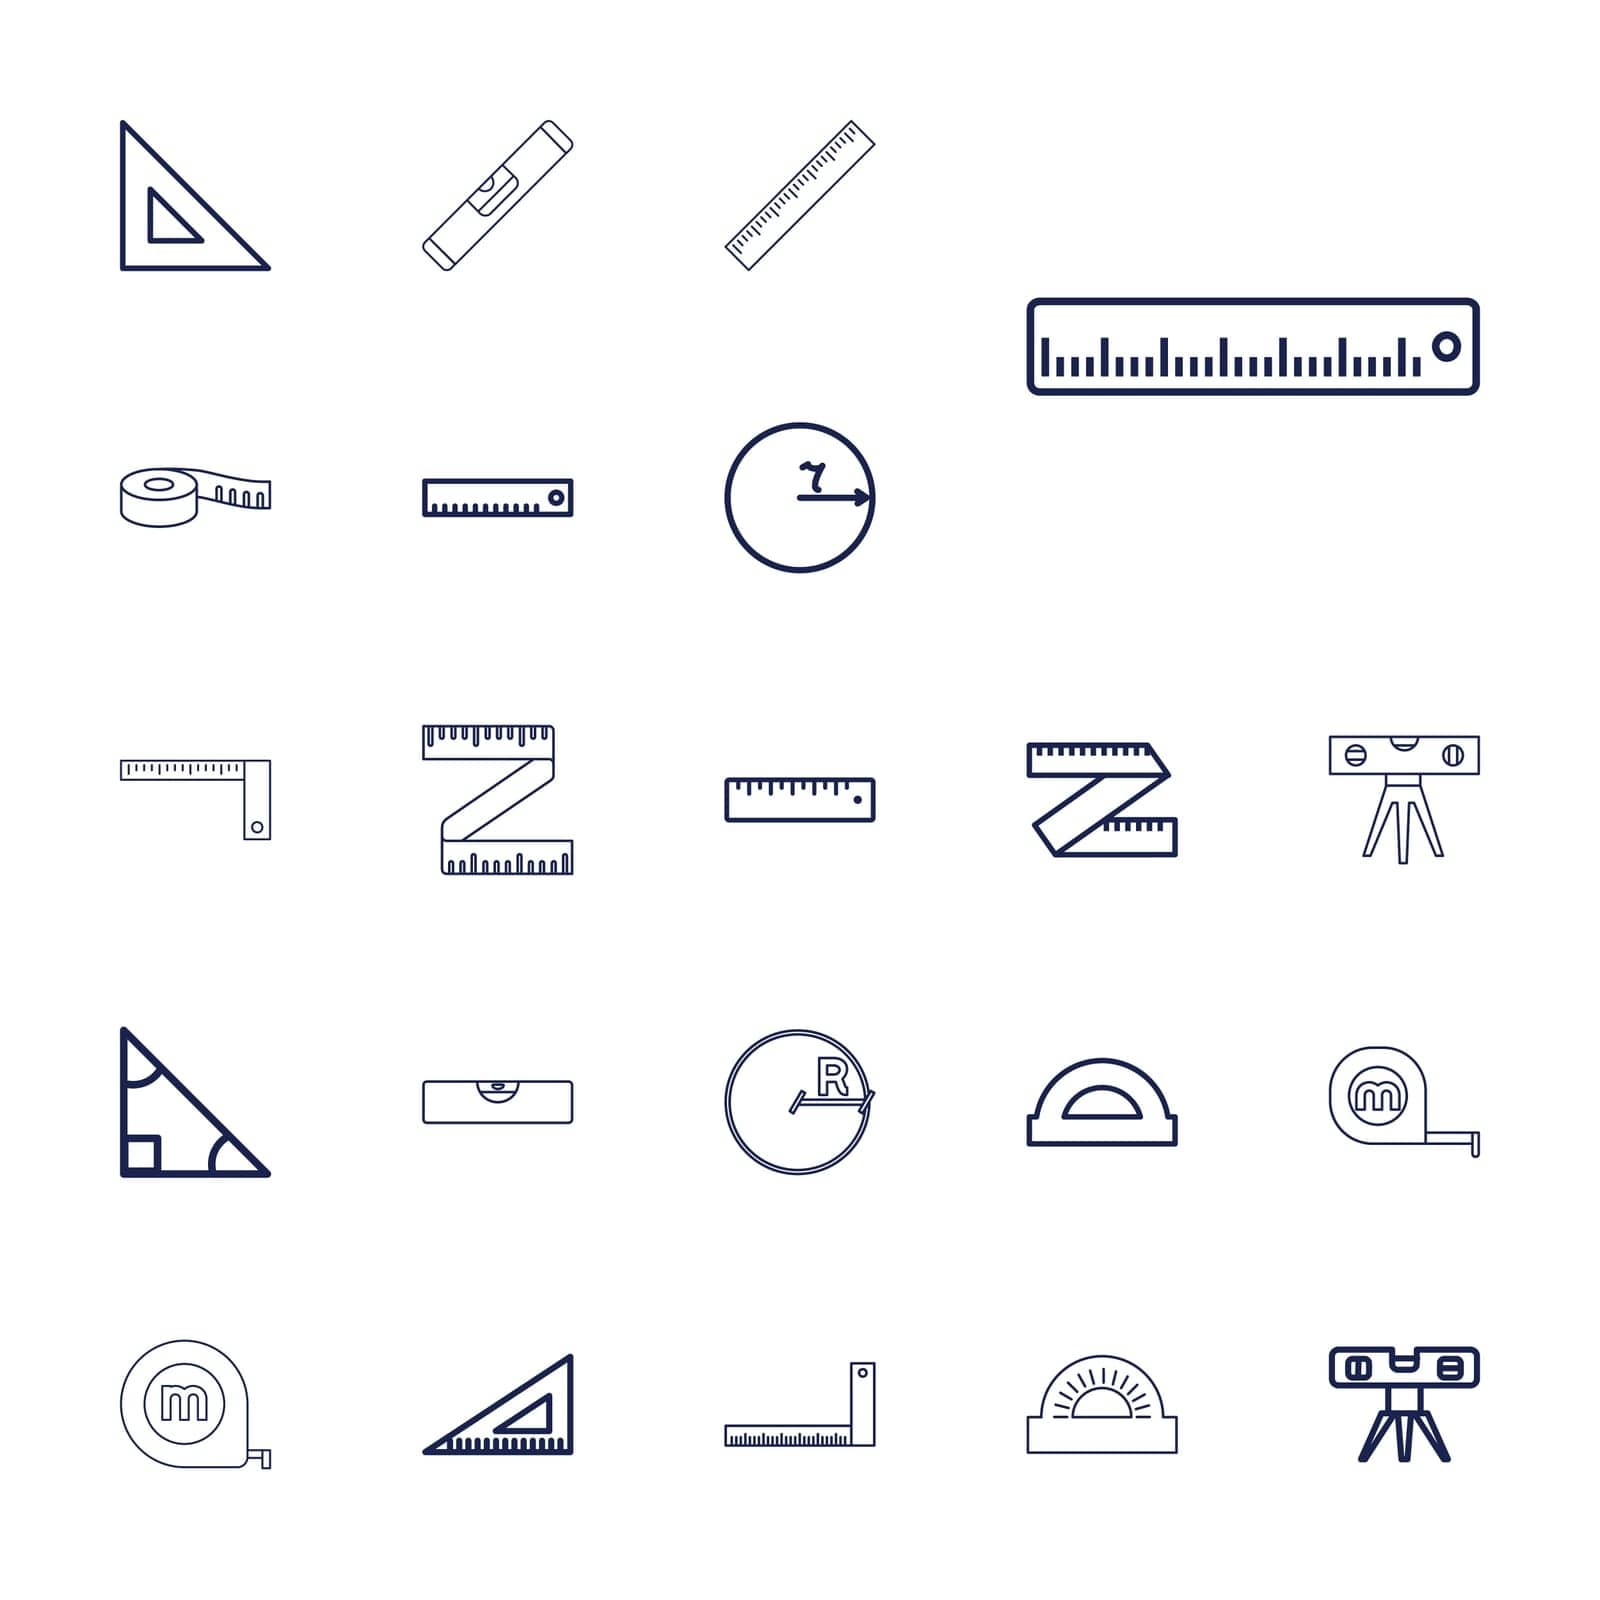 symbol,measuring,education,mathematics,line,concept,icon,sign,isolated,instrument,ruler,triangle,measurement,white,tape,school,web,flat,design,drawing,construction,vector,set,shape,level,black,length,equipment,tool,measure,size,protractor,background,geometric,geometry,illustration,circle,object by ogqcorp